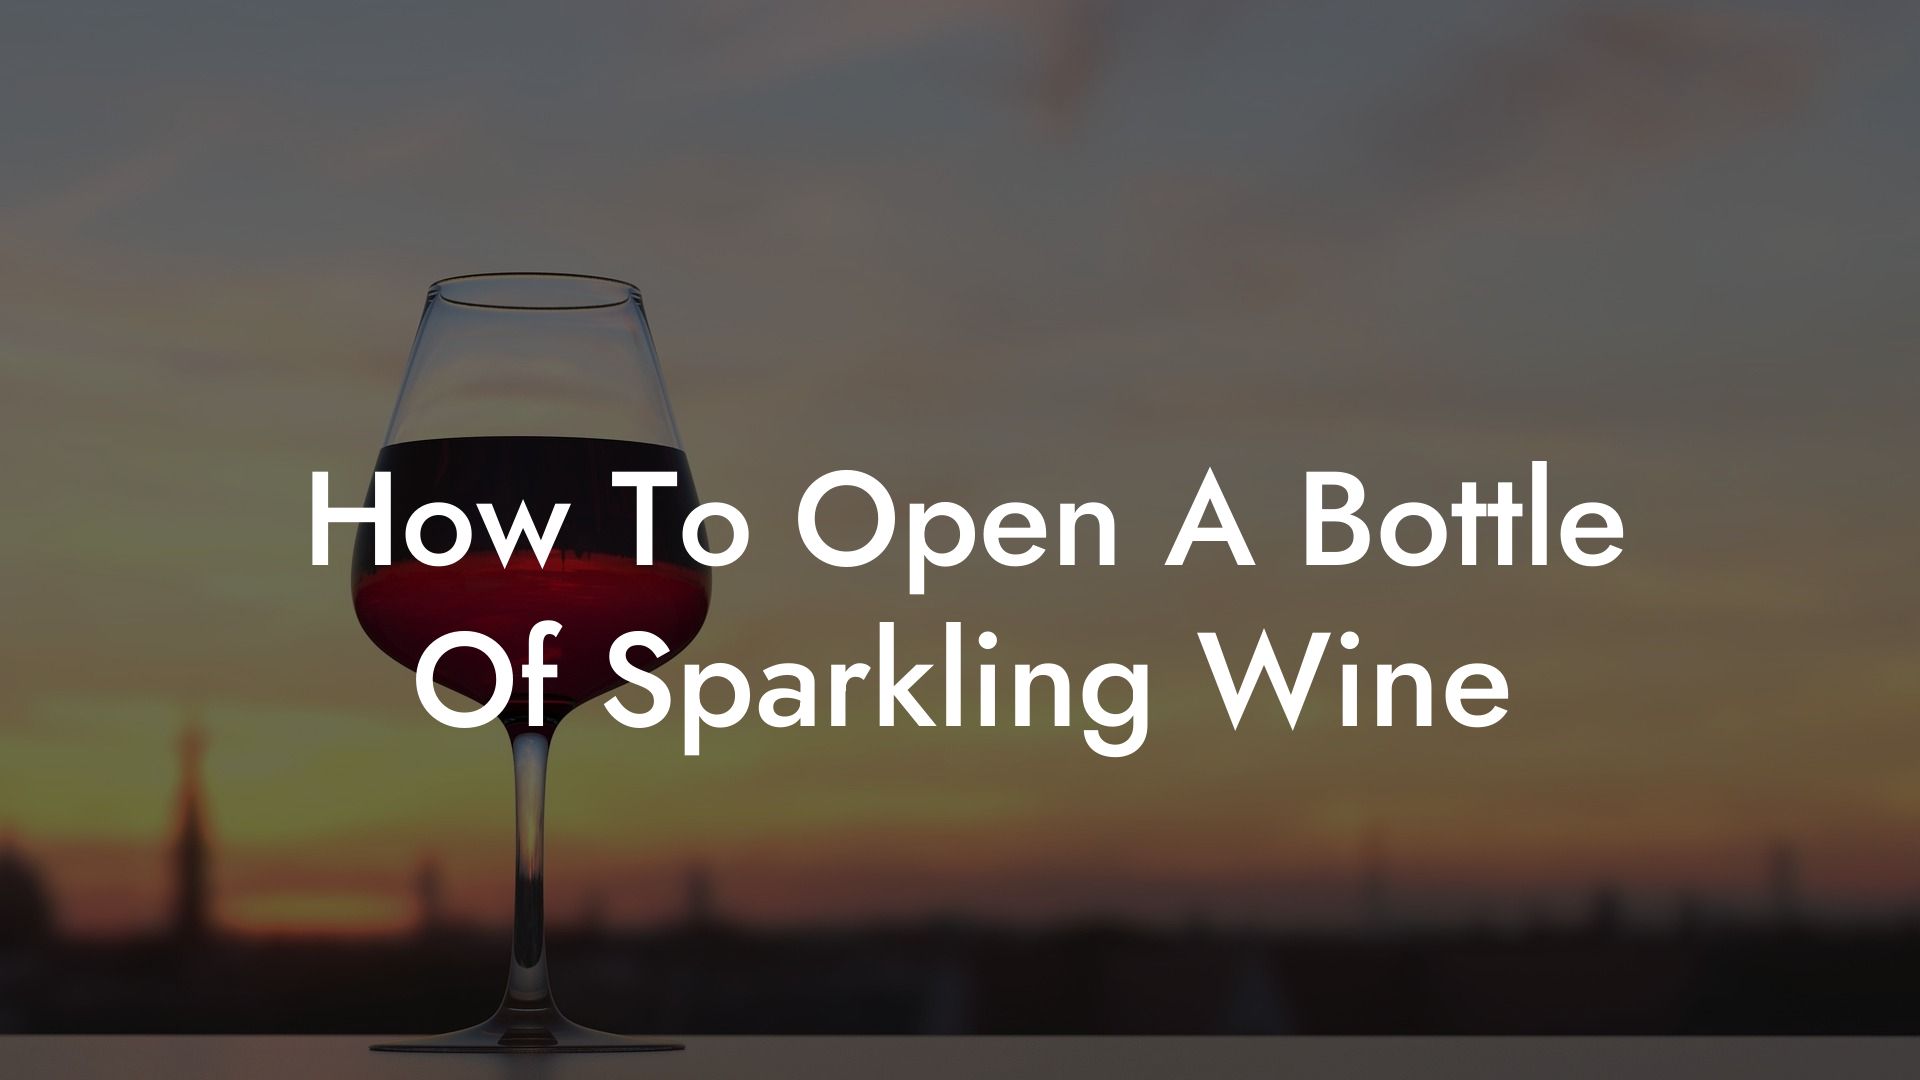 How To Open A Bottle Of Sparkling Wine